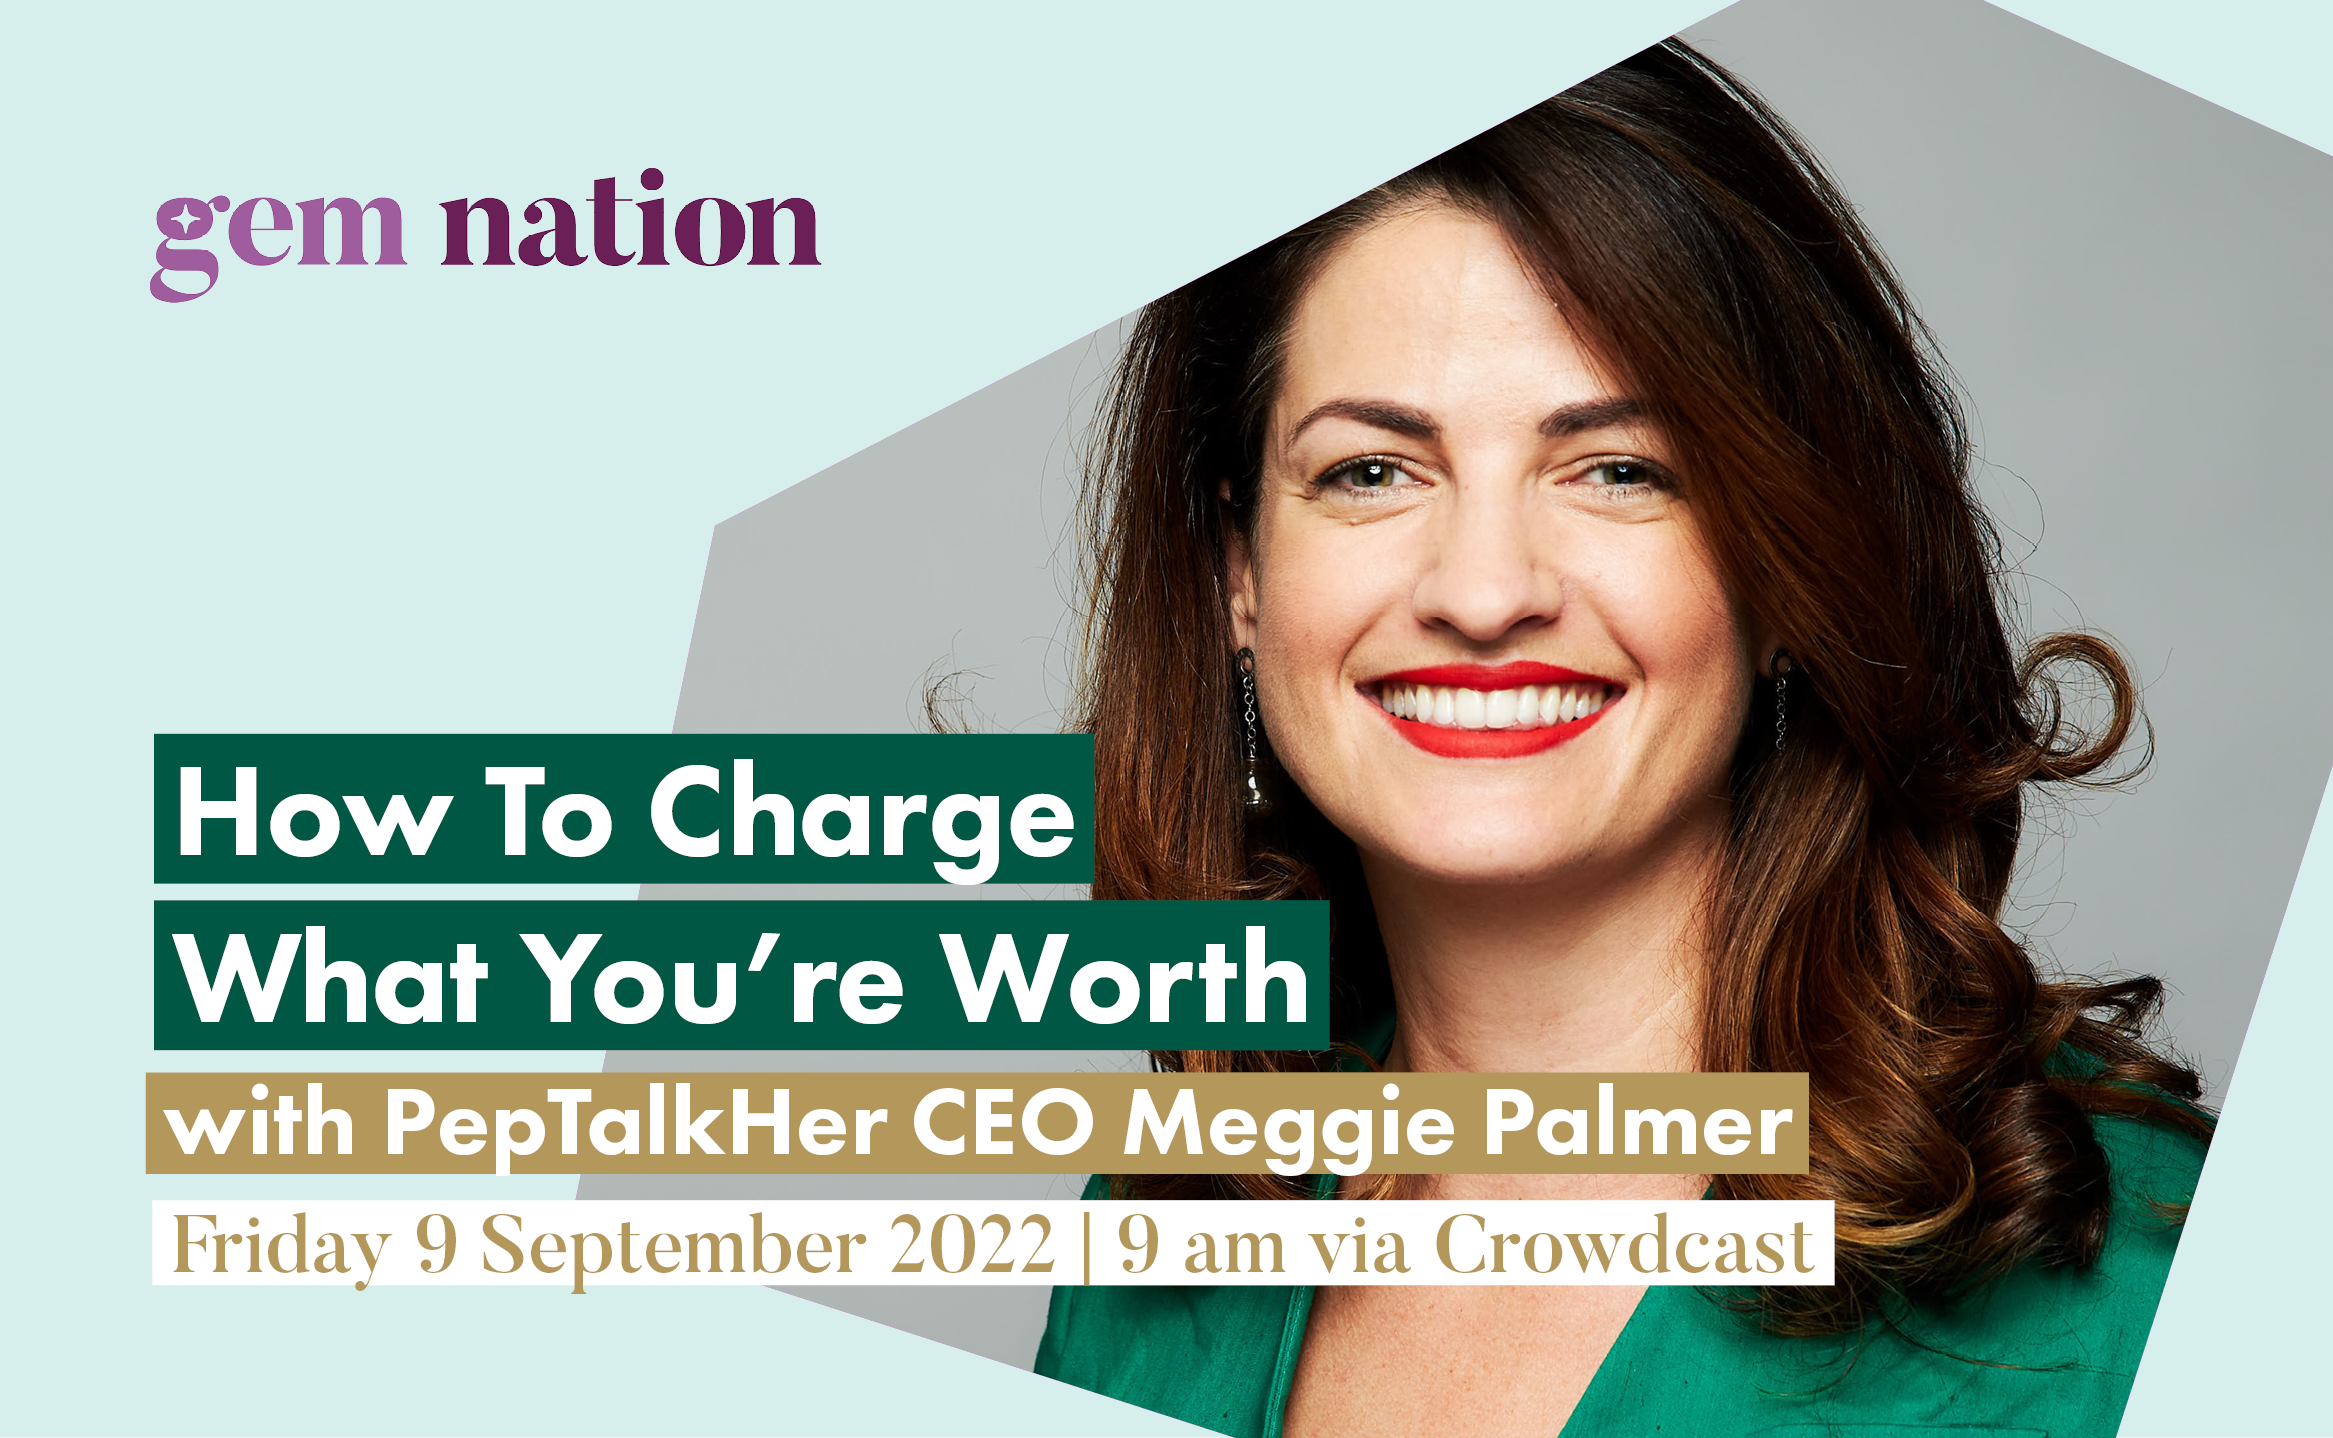 How To Charge What You’re Worth with PepTalkHer CEO, Meggie Palmer